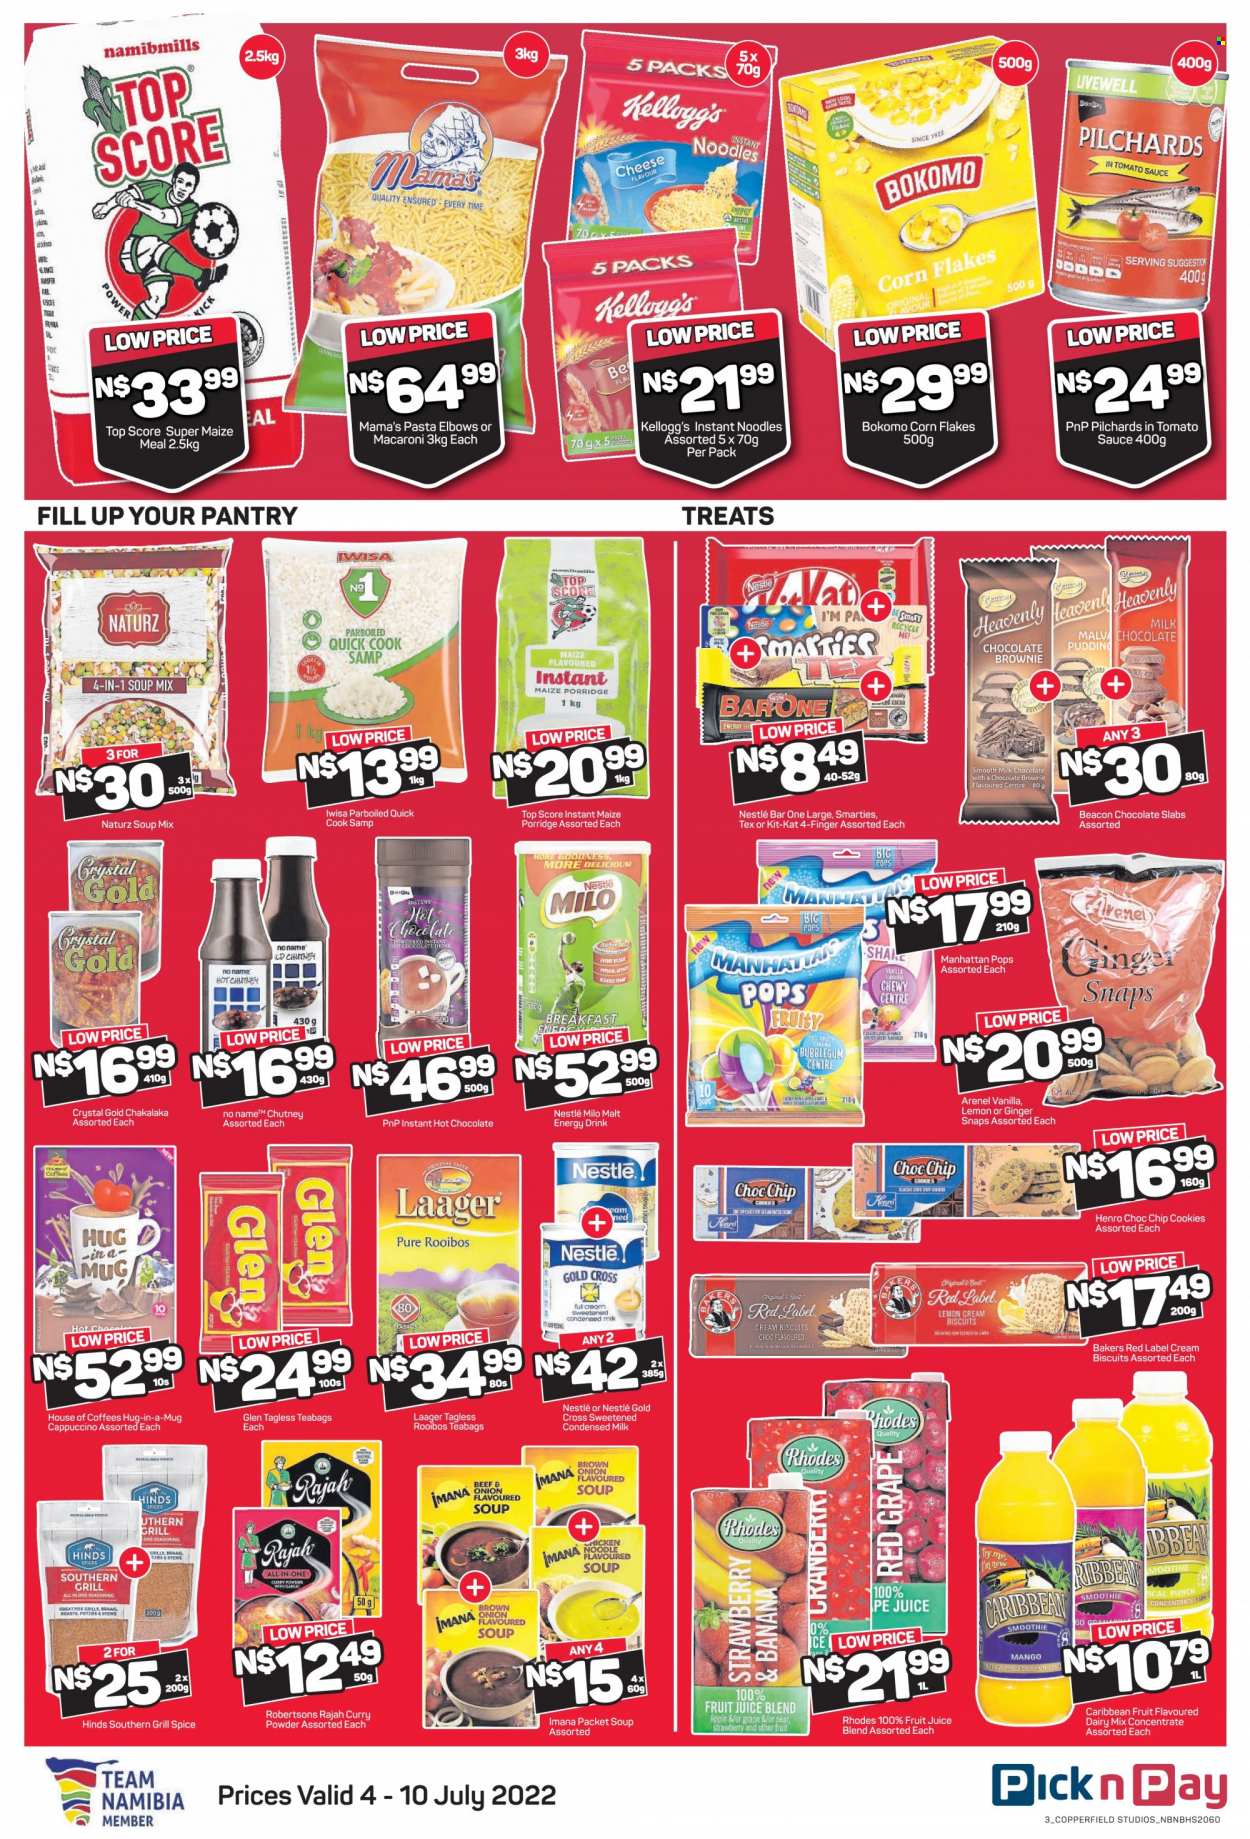 thumbnail - Pick n Pay catalogue  - 04/07/2022 - 10/07/2022 - Sales products - brownies, bananas, pears, sardines, No Name, soup mix, macaroni, soup, pasta, instant noodles, chakalaka, noodles, Mama's, cheese, pudding, chocolate pudding, condensed milk, Milo, cookies, milk chocolate, Nestlé, chocolate slabs, bubblegum, Smarties, Kellogg's, biscuit, maize meal, corn flakes, porridge, spice, curry powder, Hinds, chutney, energy drink, fruit juice, juice, smoothie, chocolate drink, hot chocolate, tea, tea bags, rooibos tea, cappuccino, punch, Bakers. Page 3.